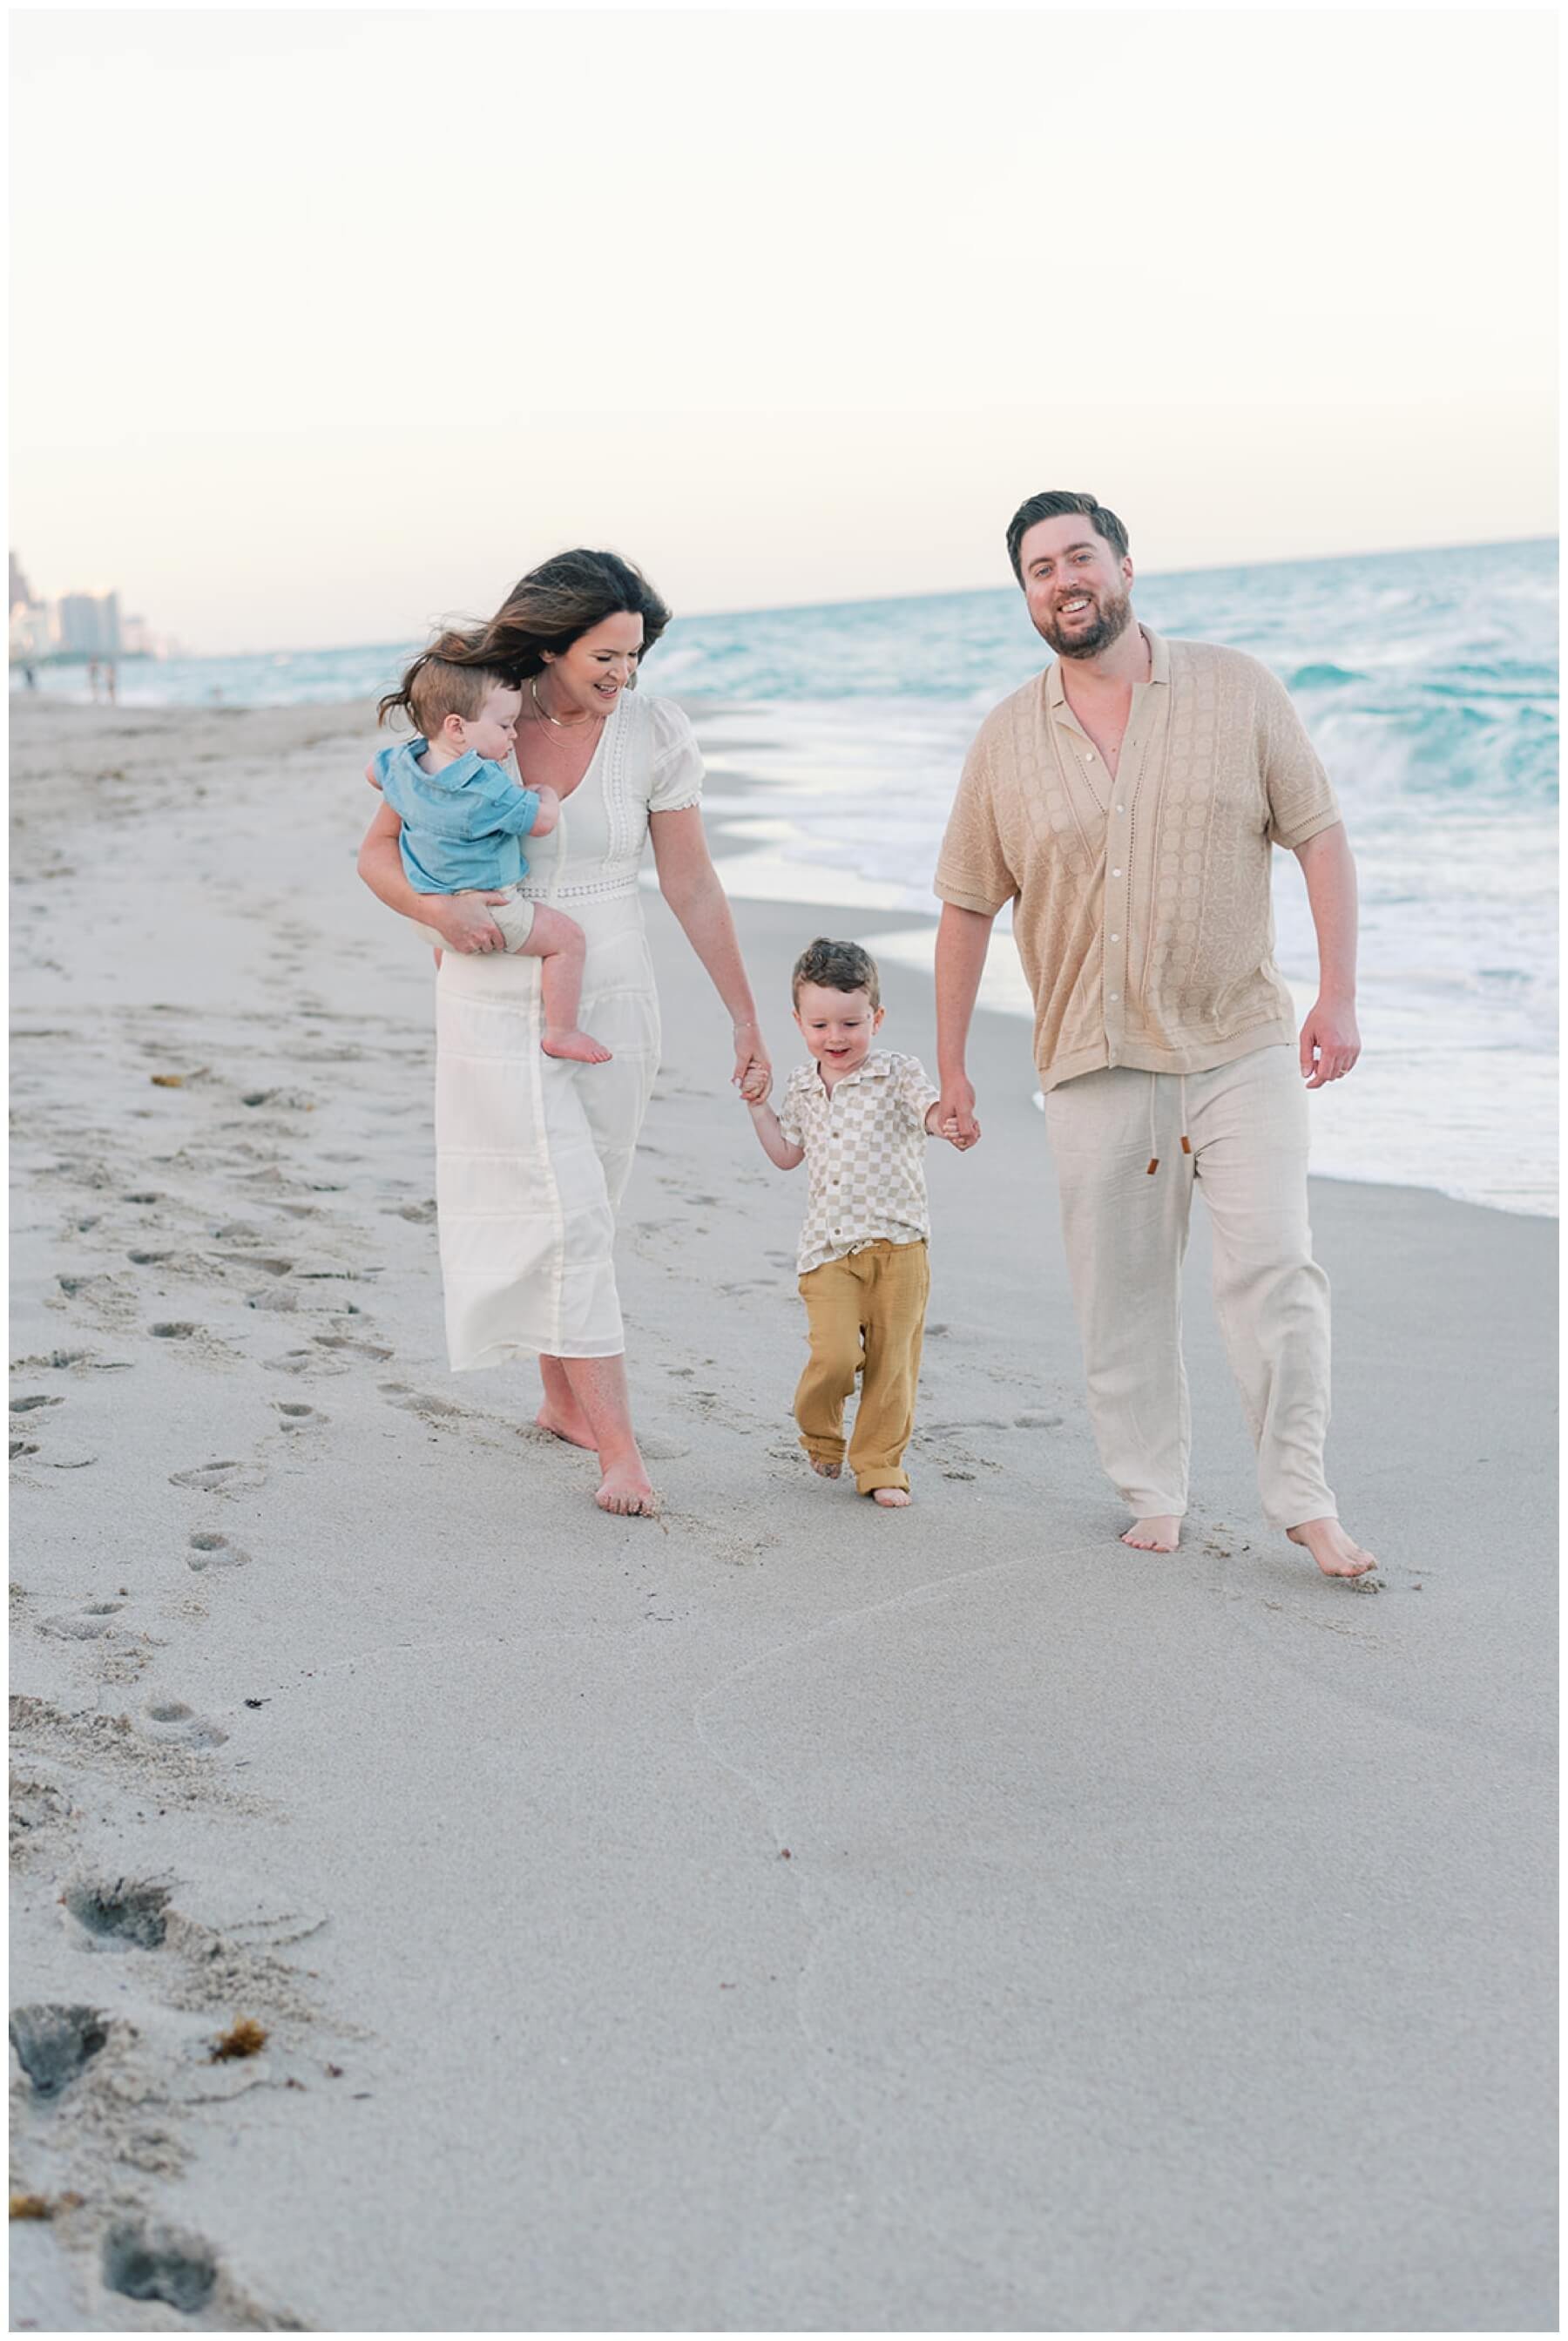 Toddler walking between parents and holding their hand on the beach | NKB Photo